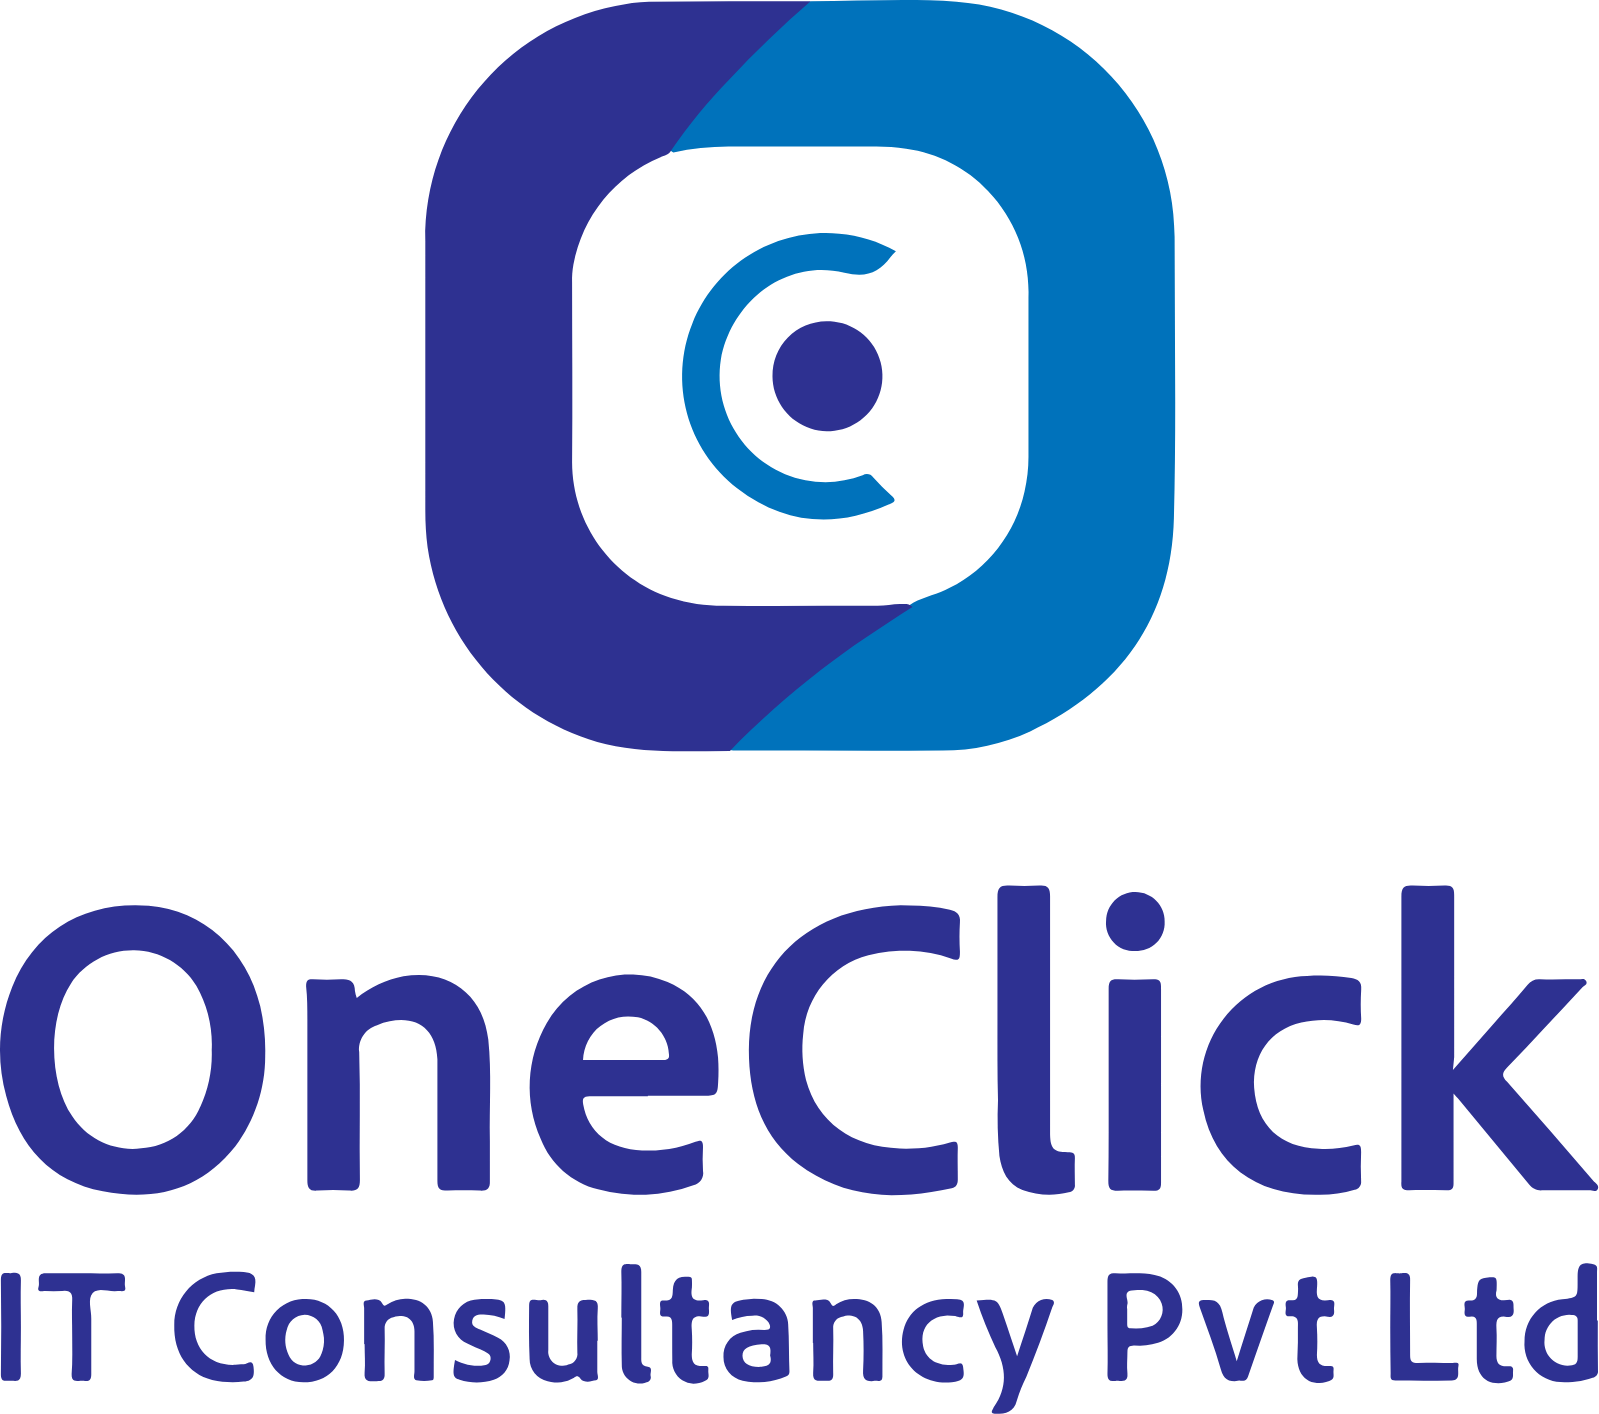 OneClick IT Consultancy Pvt. Ltd. profile on Qualified.One